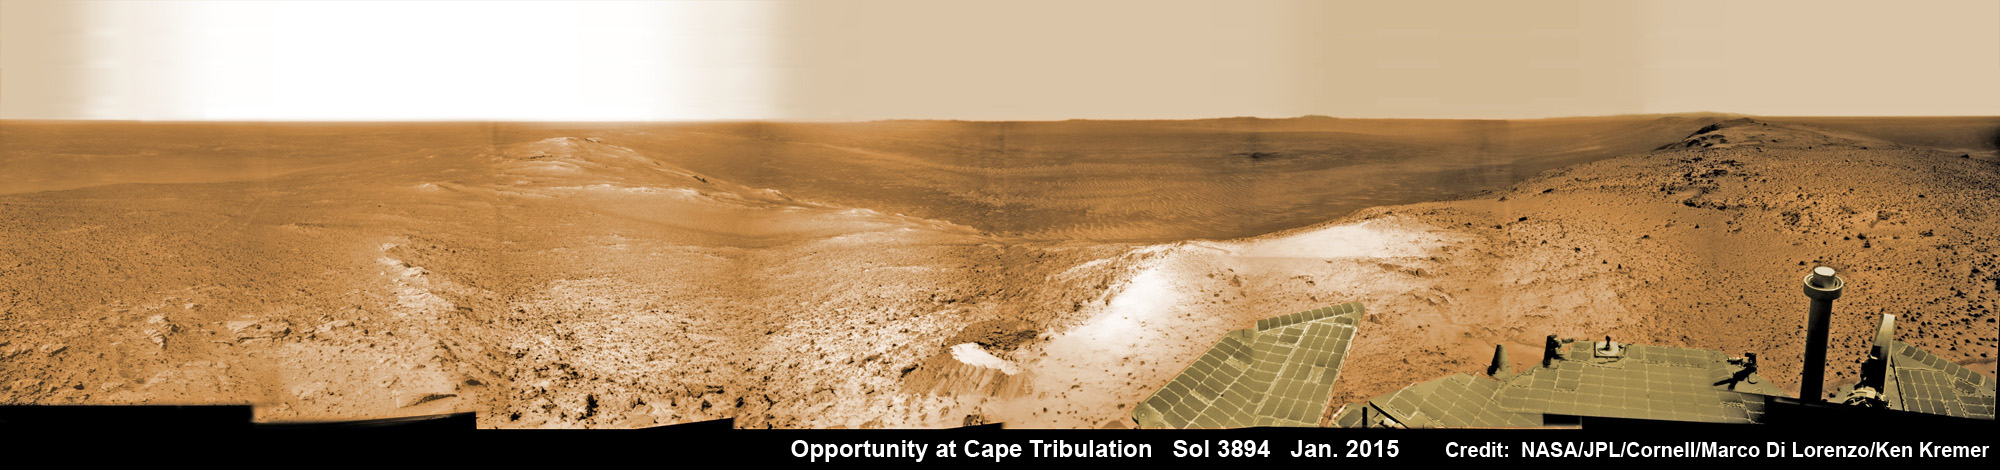 Stunning new mountain top view from NASA’s Opportunity rover after reaching summit of Cape Tribulation in January 2015 nearly eleven years after Martian touchdown.  Panoramic scene shows vast expanse of Endeavour Crater from highest mountain rover will ever climb. See rover solar panels at right and wheel tracks at left.  This navcam camera photo mosaic was assembled from images taken on Sol 3894, Jan. 6, 2015 and colorized.  Credit: NASA/JPL/Cornell/ Marco Di Lorenzo/Ken Kremer - kenkremer.com